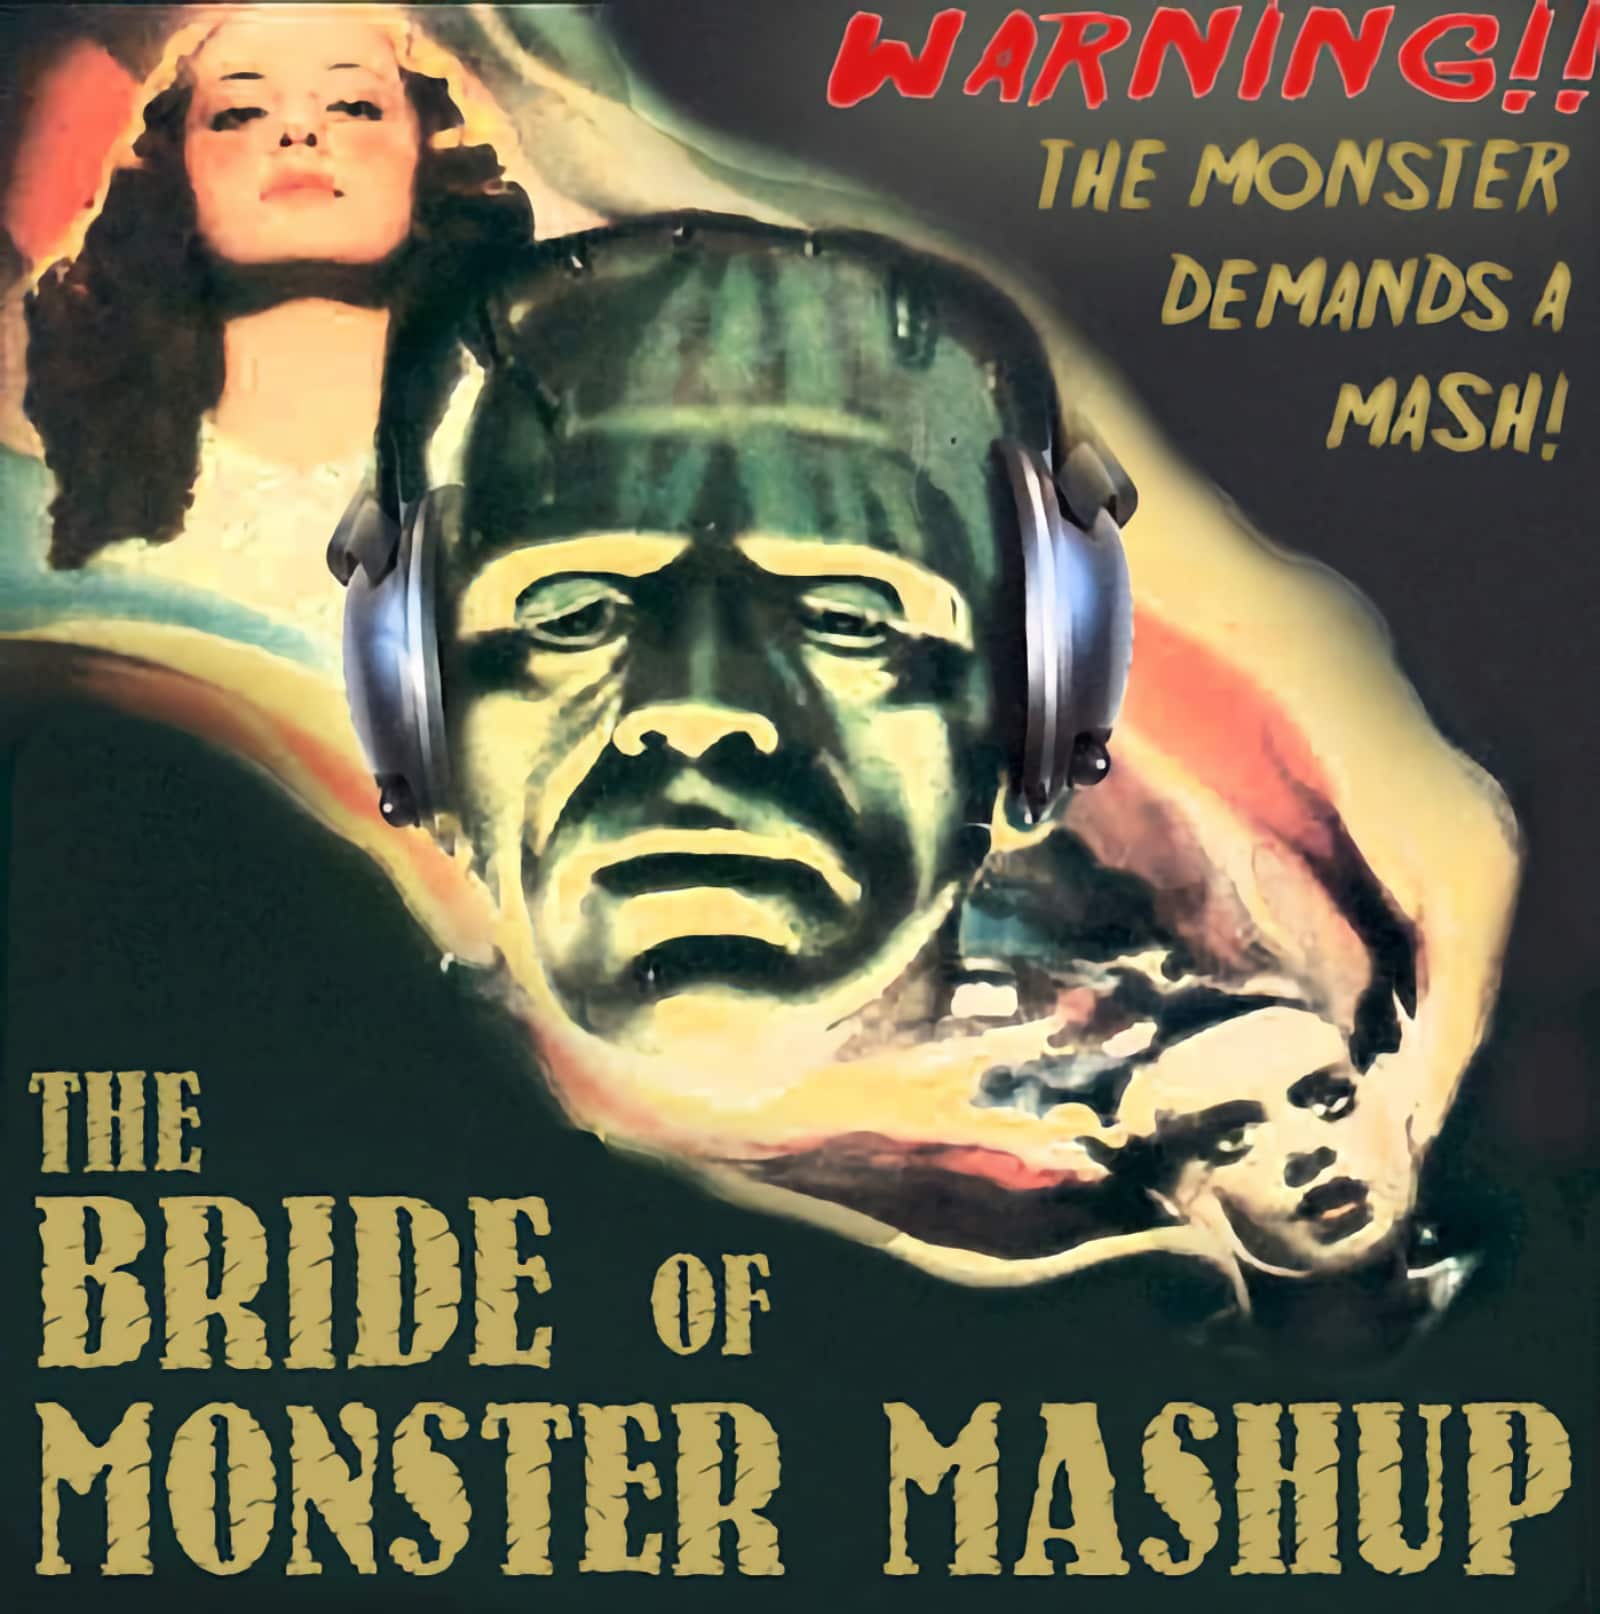 the bride of monster mashup halloween frankenstein - Radio Clash Podcast Bride of Monster Mash repost Radio Clash Music Mashup Podcast brings you the best in eclectic tunes, mashups and remixes from around the world. Since 2004, we've been bringing you the freshest and most innovative music from a diverse range of genres and cultures. Join us on our musical journey as we explore the sounds of yesterday, today, and tomorrow. Discover new music and be inspired by the mashup of musical styles that only Radio Clash can provide. Subscribe now to elevate your musical experience!